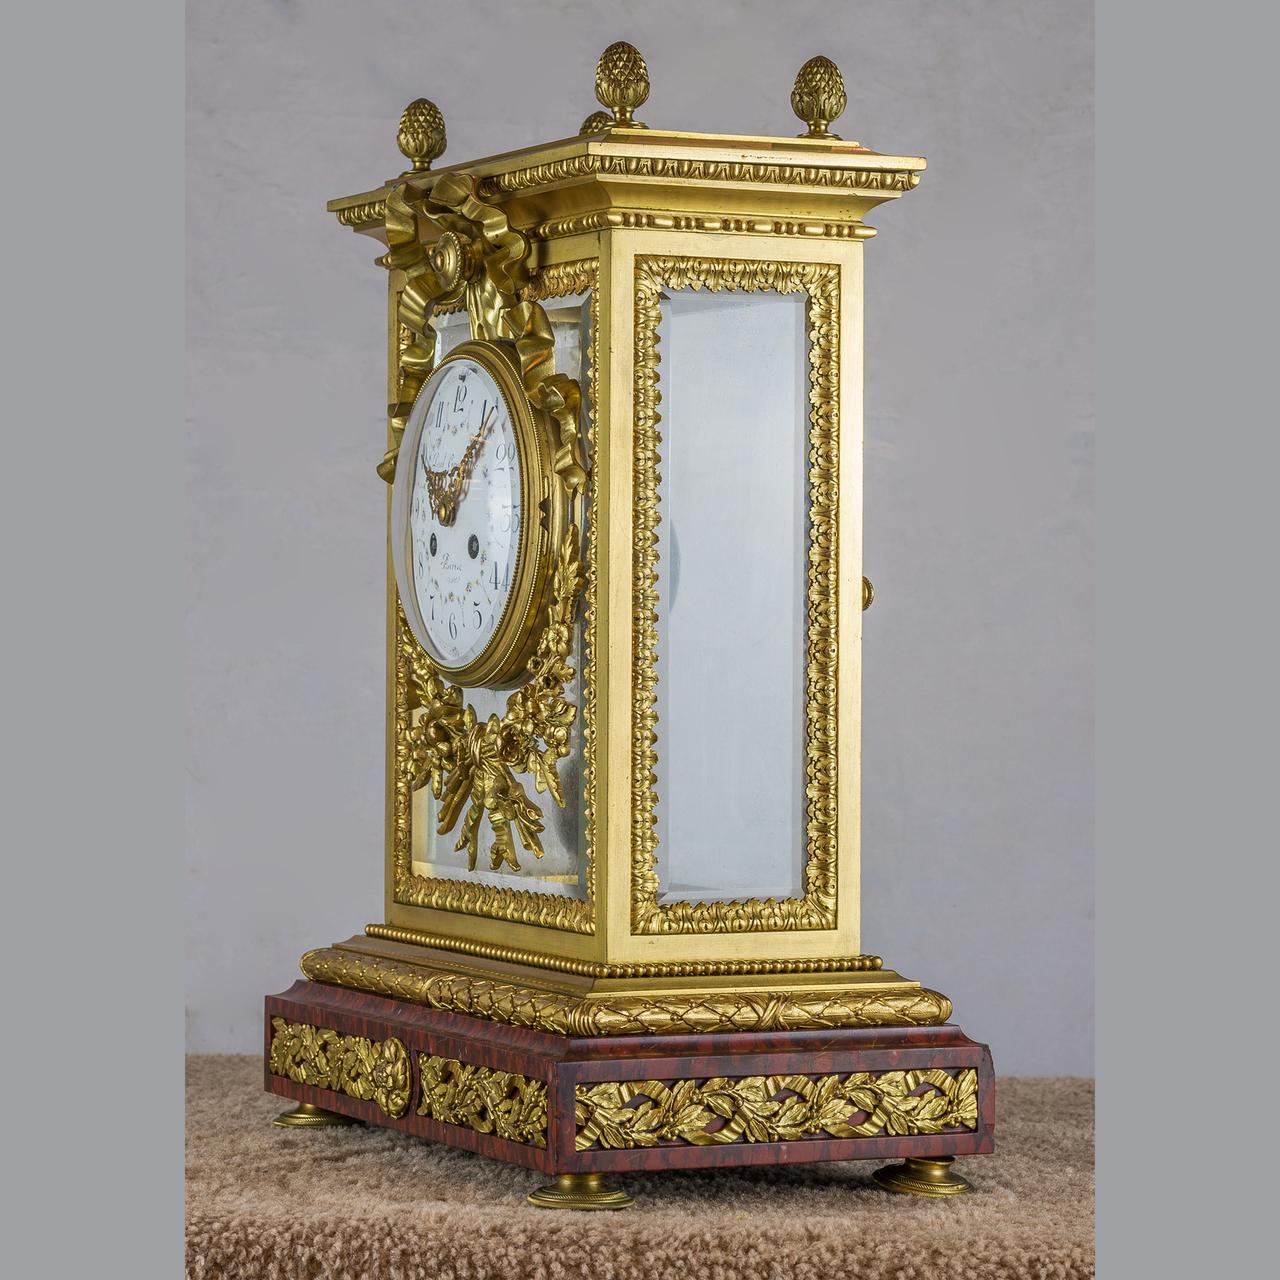 Surmounted by berry finials, the beveled glass sides within cast leaf-tips borders mounted on the front with a ribbon tied enamel dial inscribed, “Paul Graselins/Auriel Charlot 8,” above a wreath. The movement stamped, “Lemerle Charpentier Fabrizue